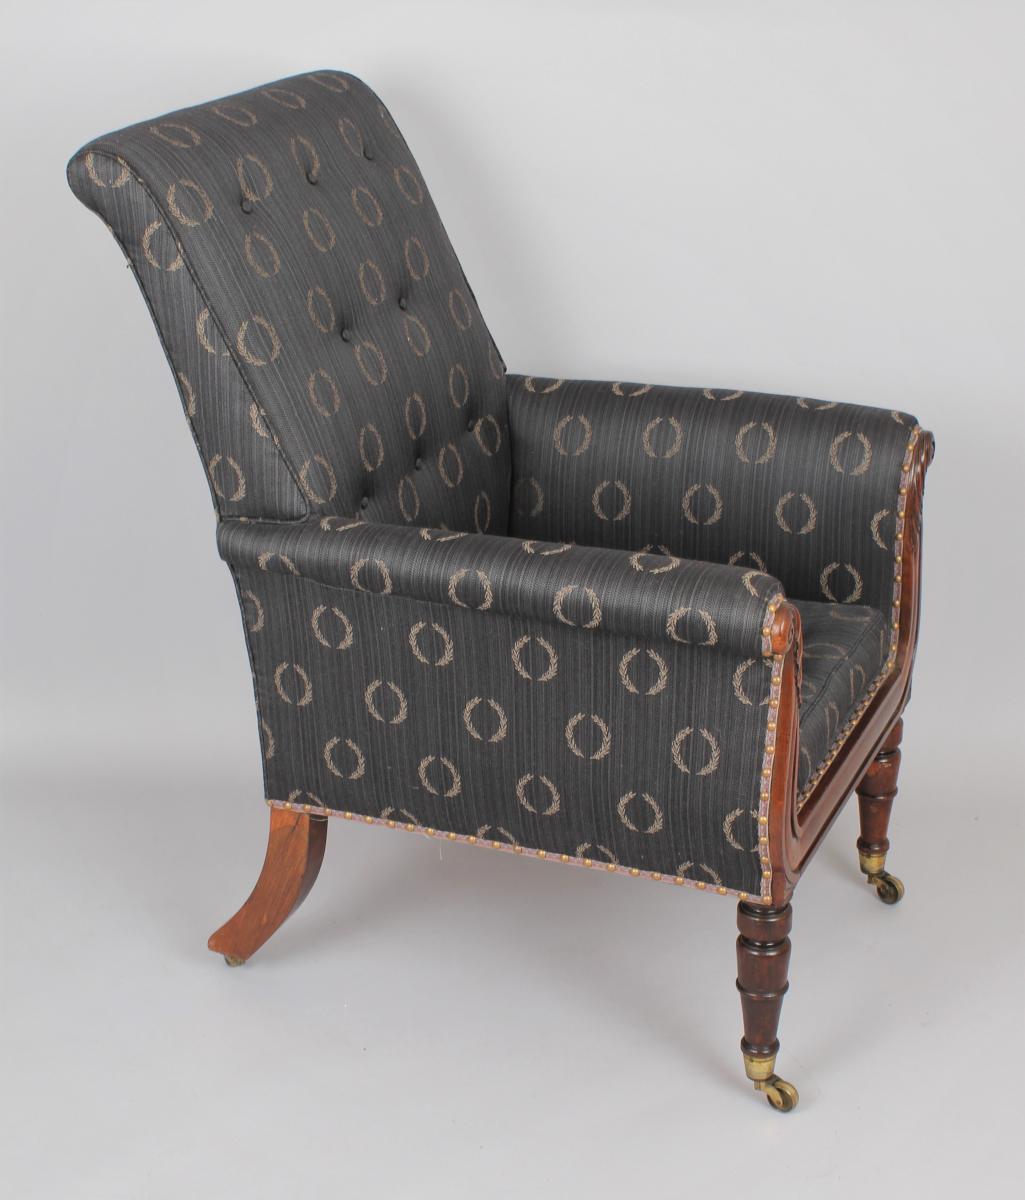 George IV period rosewood bergere library arm chairs